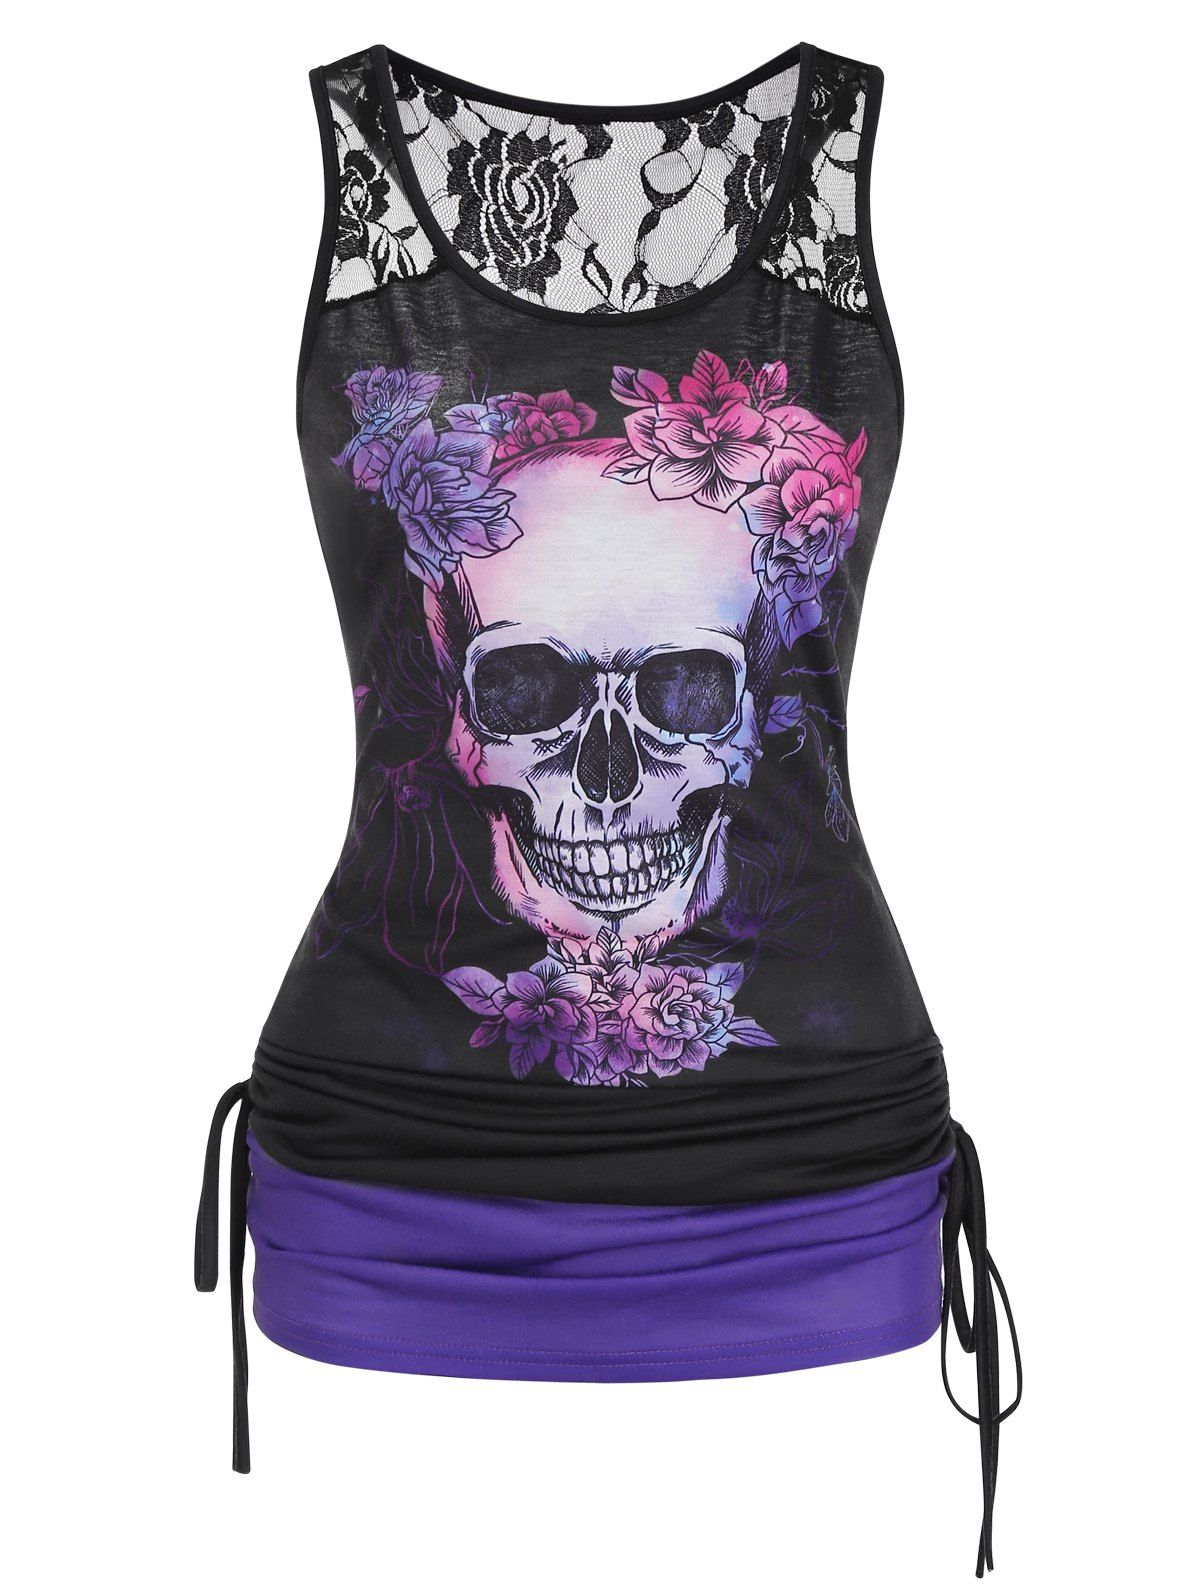 Summer Gothic Contrast Colorblock Tank Top Skull Floral Print Cinched Lace Insert Top - BLACK S